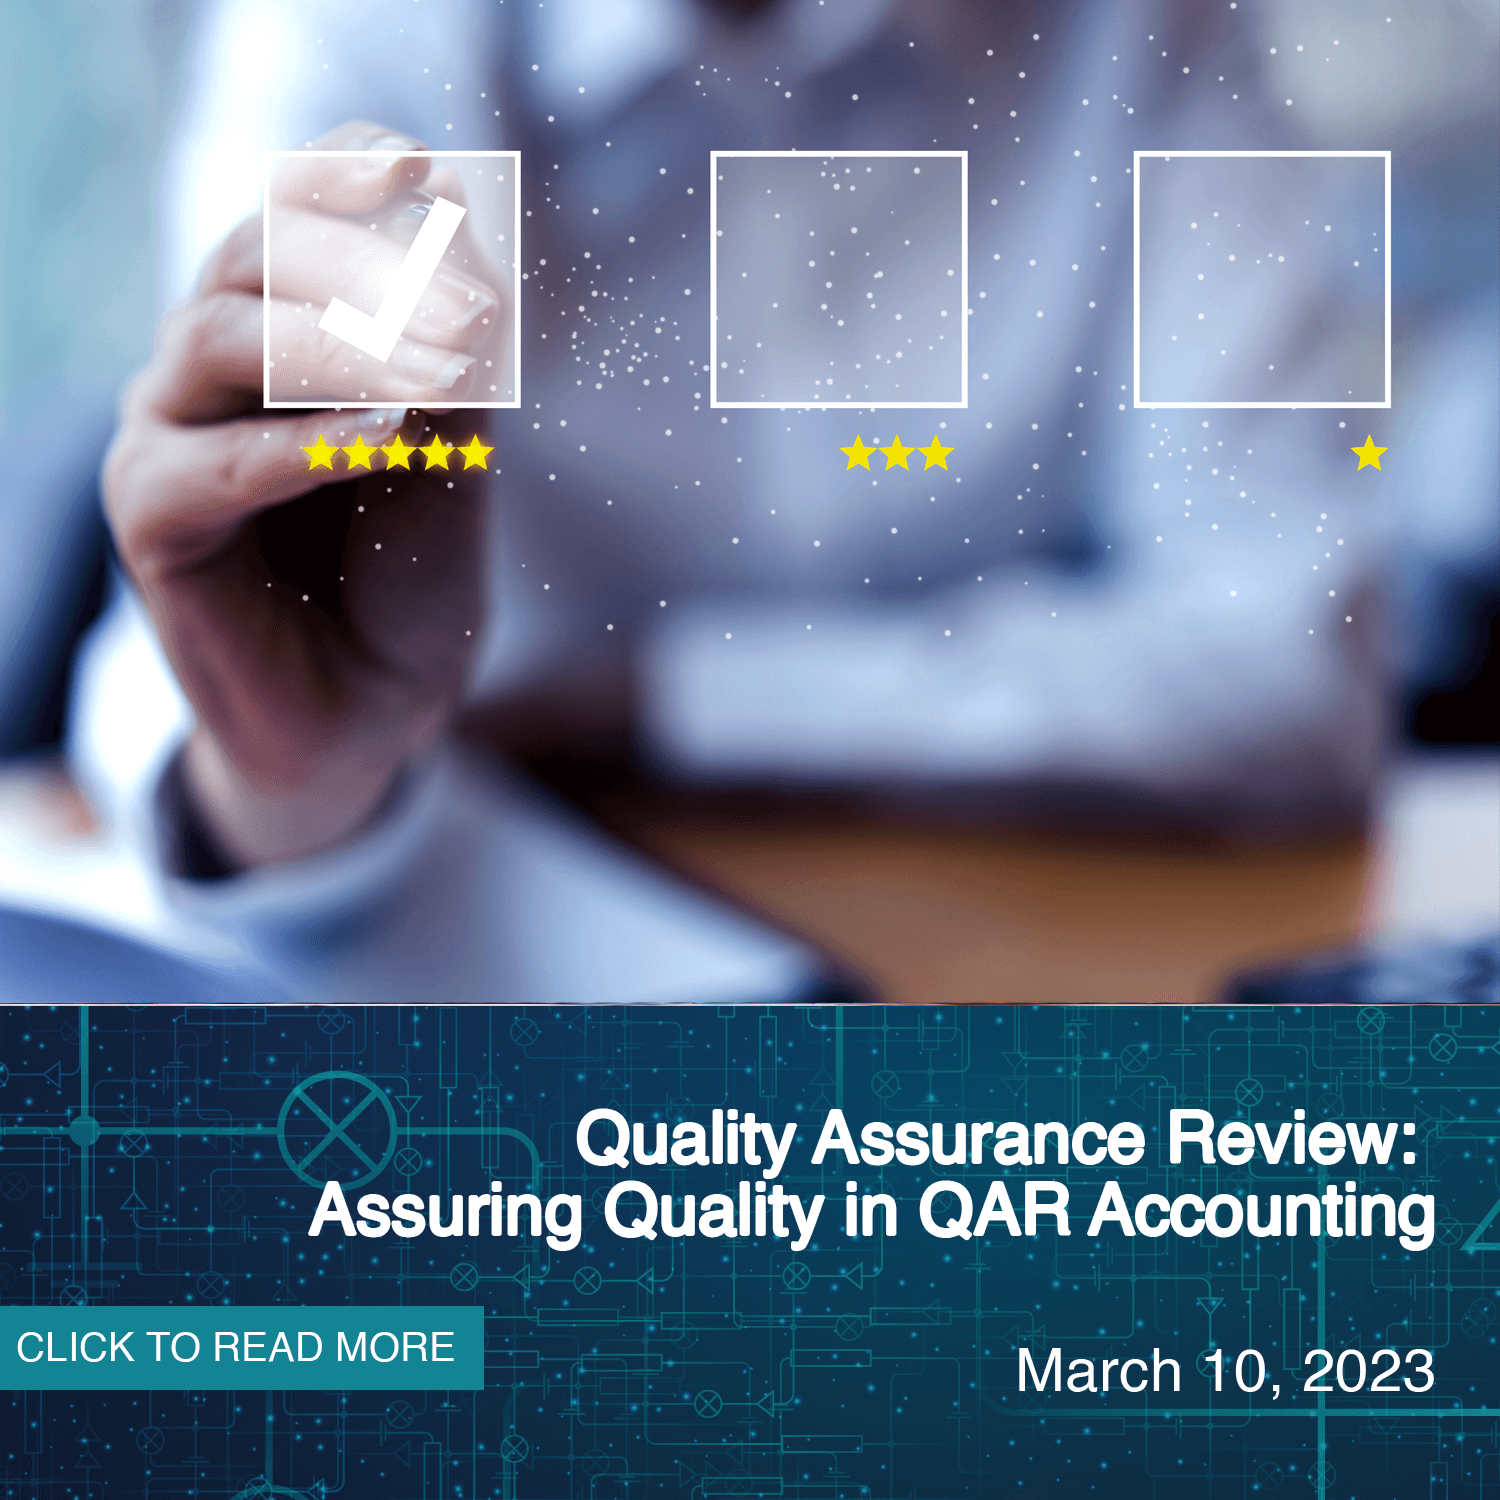 Quality Assurance Review: Assuring Quality in QAR Accounting